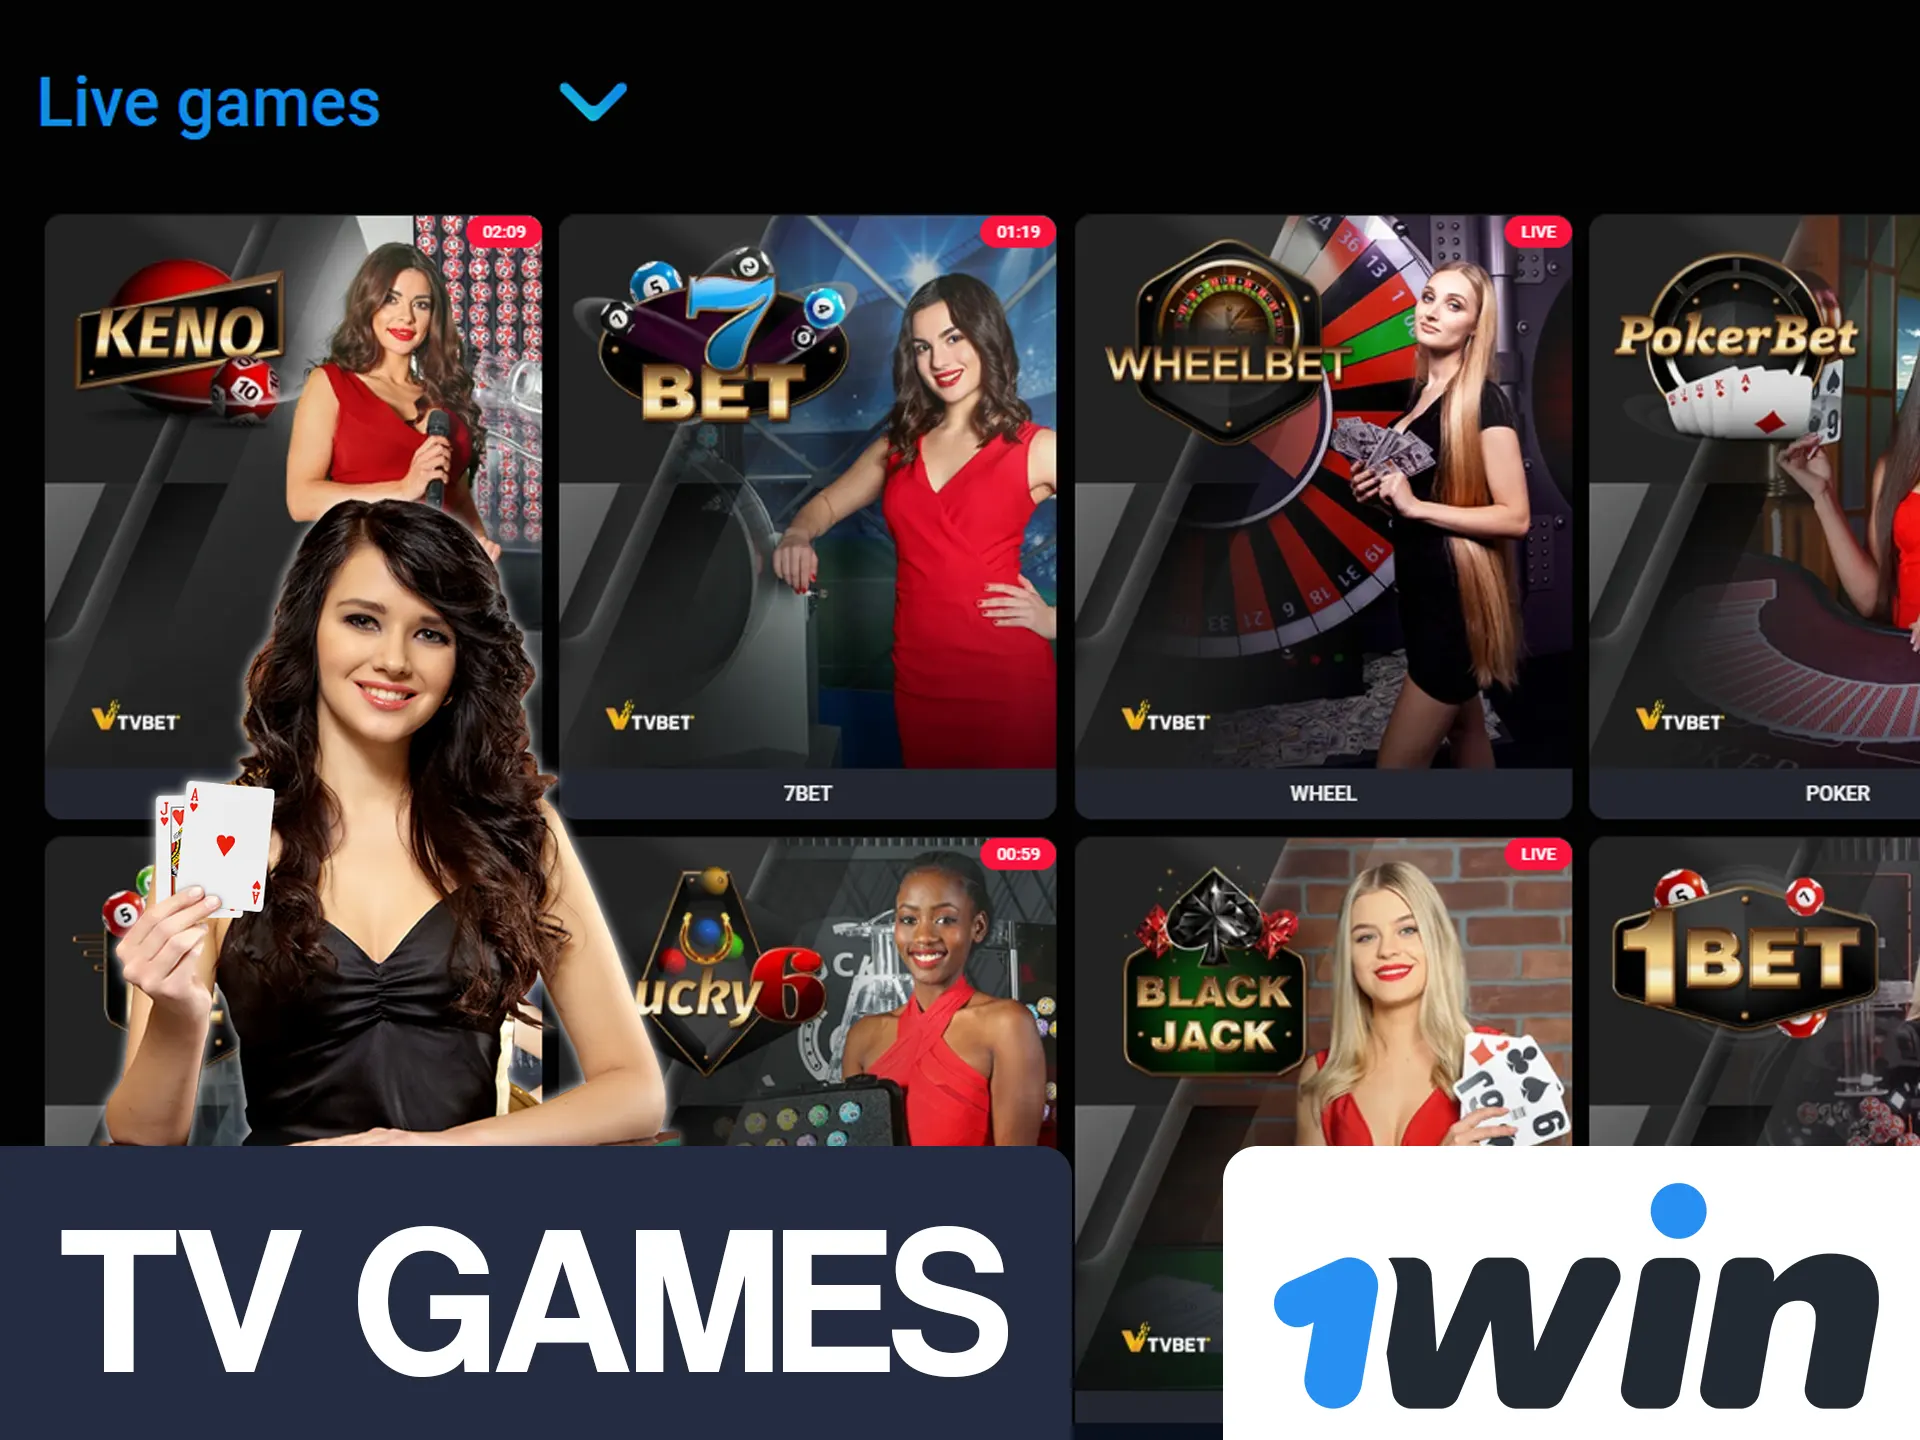 Play TV games in live format at 1win.